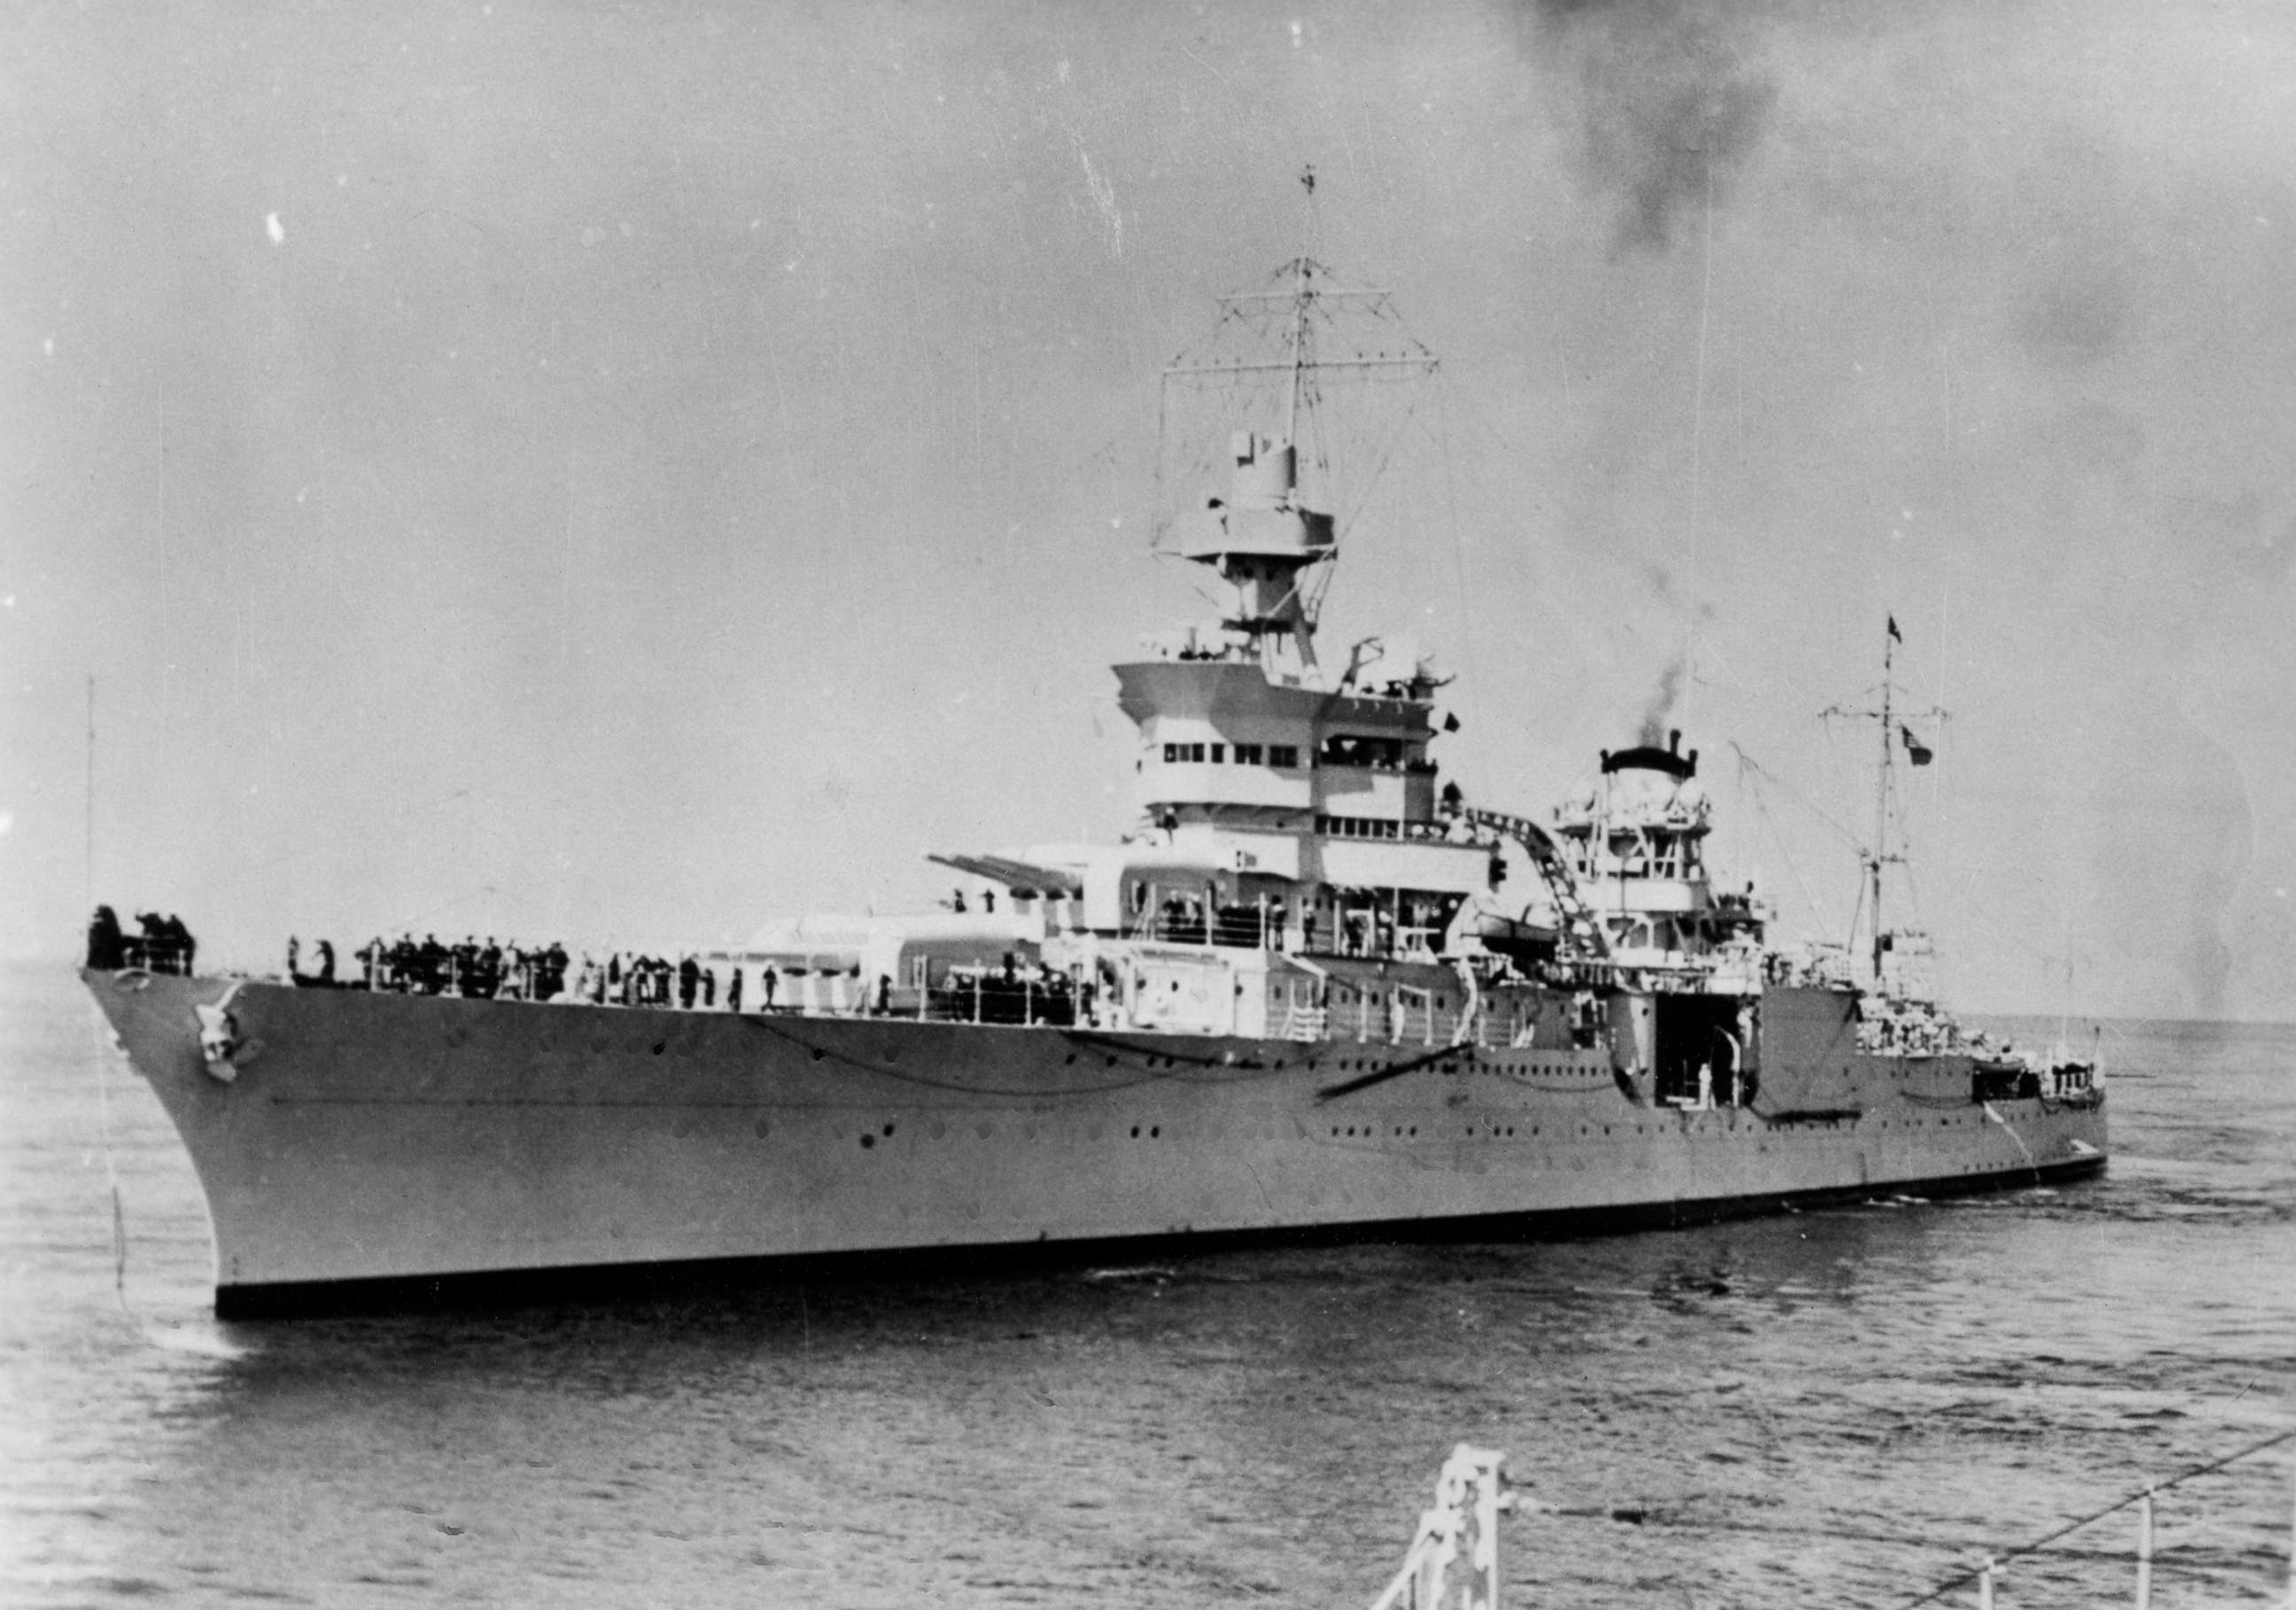 PHOTO: The USS Indianapolis, pictured in the 1940s, was a Navy cruiser active in the Pacific theater during World War II.